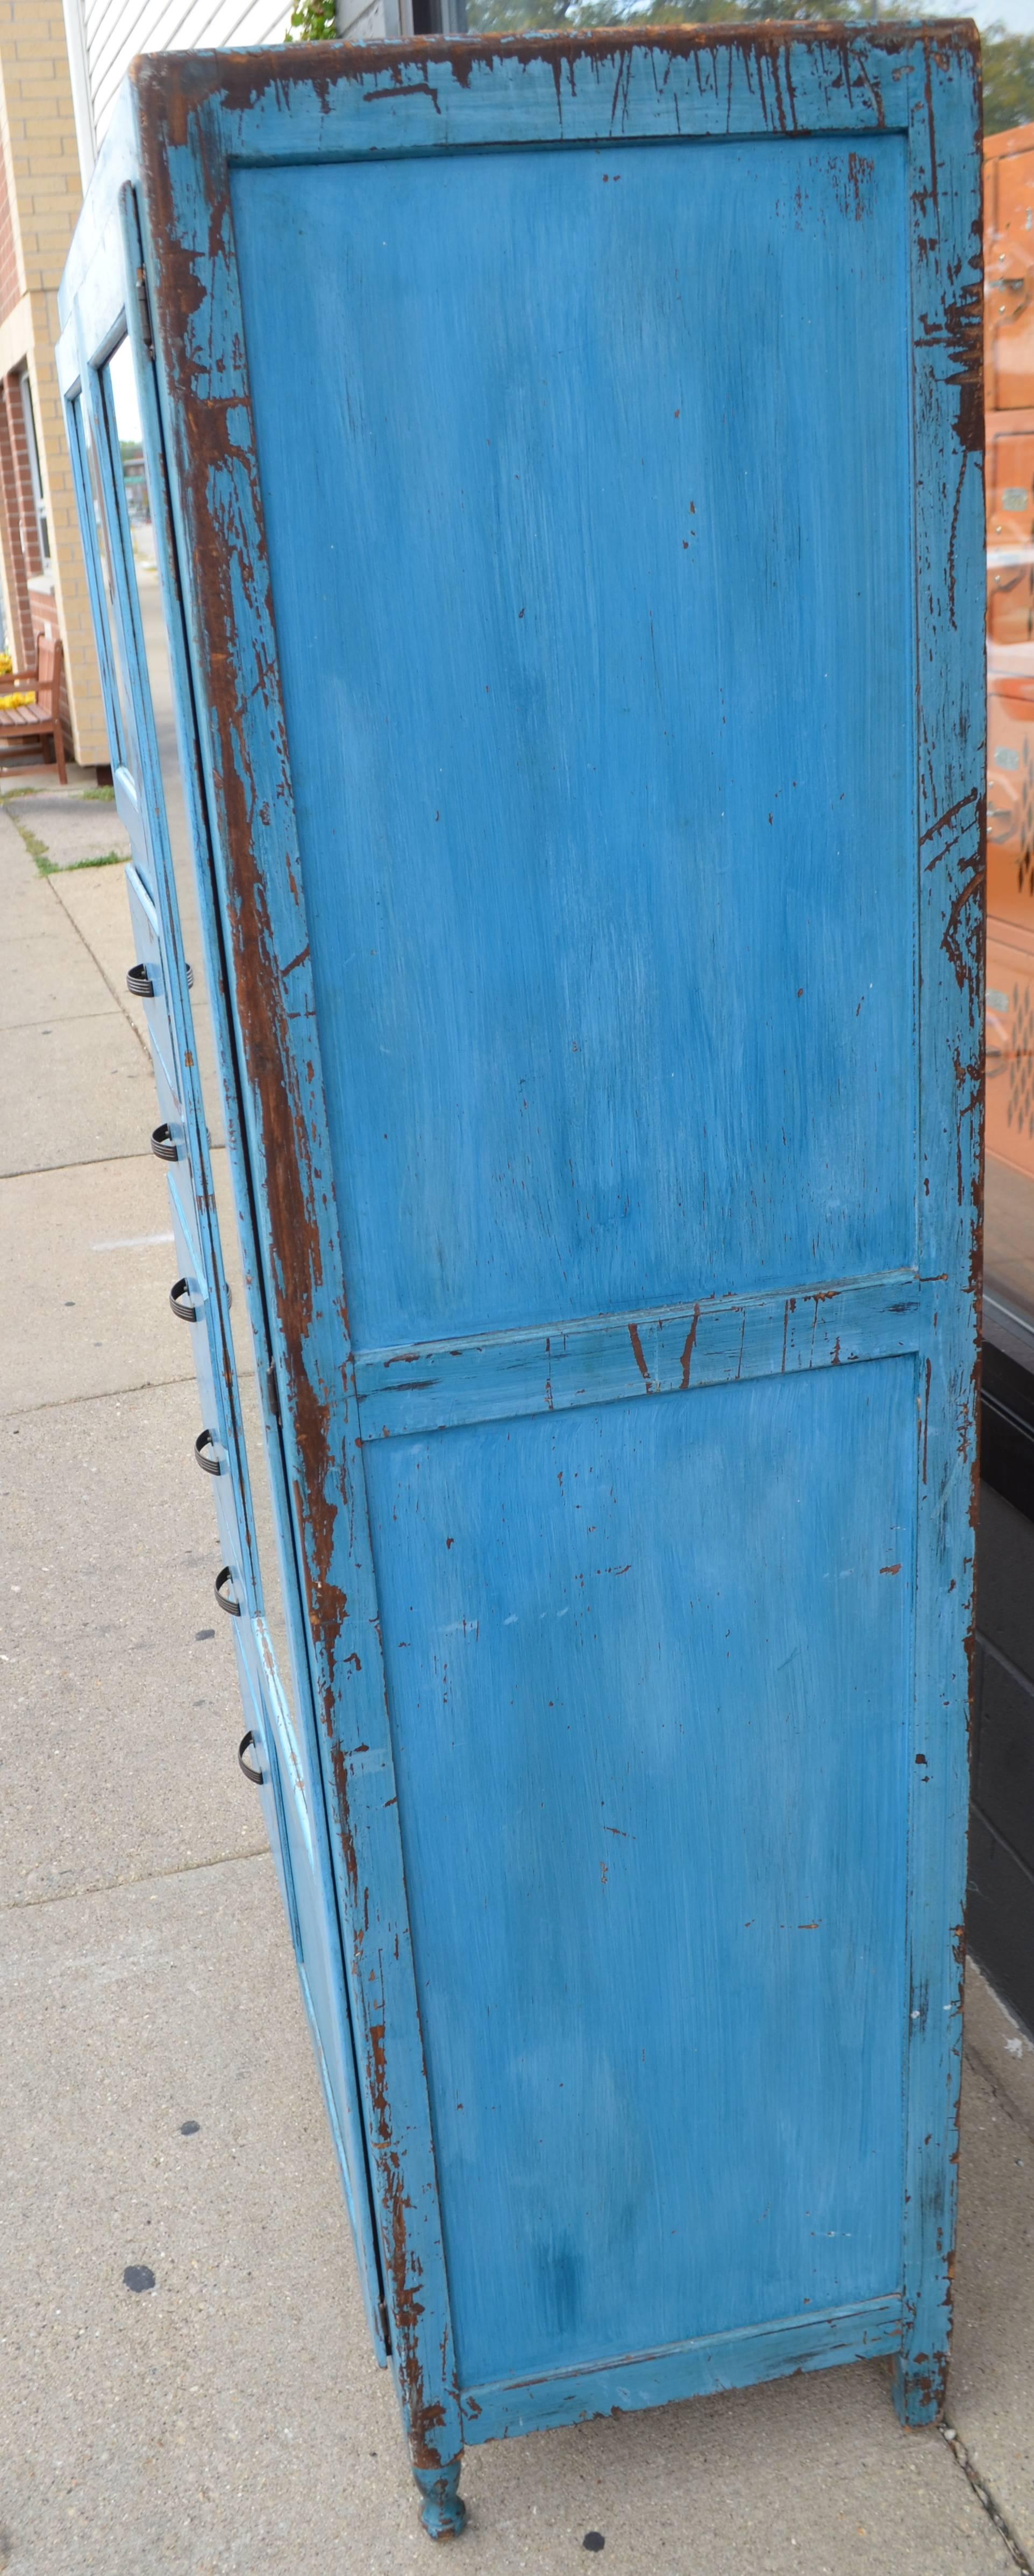 American Storage Cupboard Closet, 1930s, in as-Found Blue for Home, Apartment, Cottage